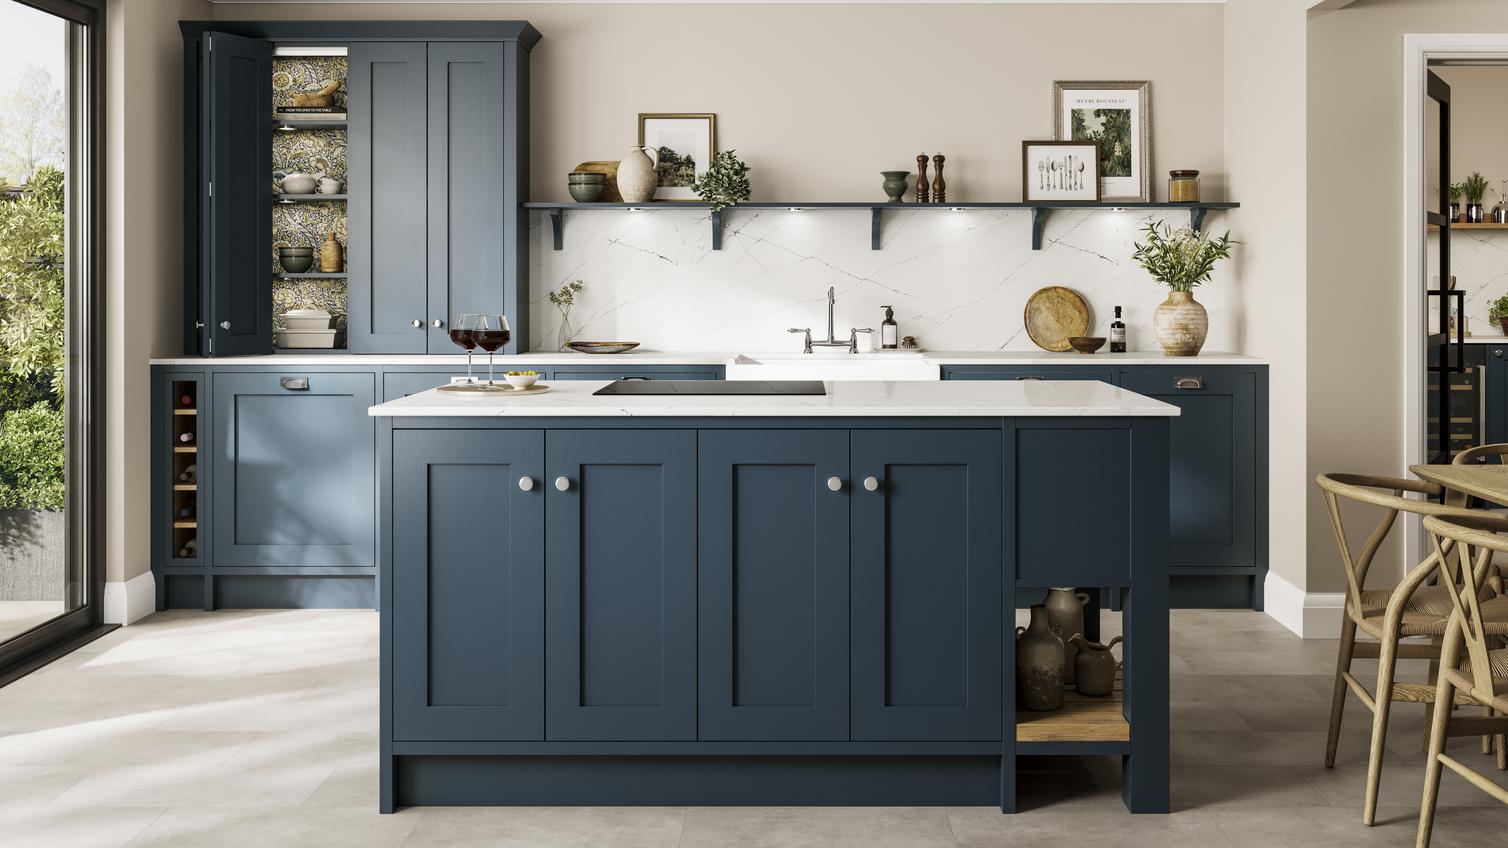 A classic kitchen with in-frame, blue shaker doors, white worktops, chrome knobs, and a black hob in an island layout. 